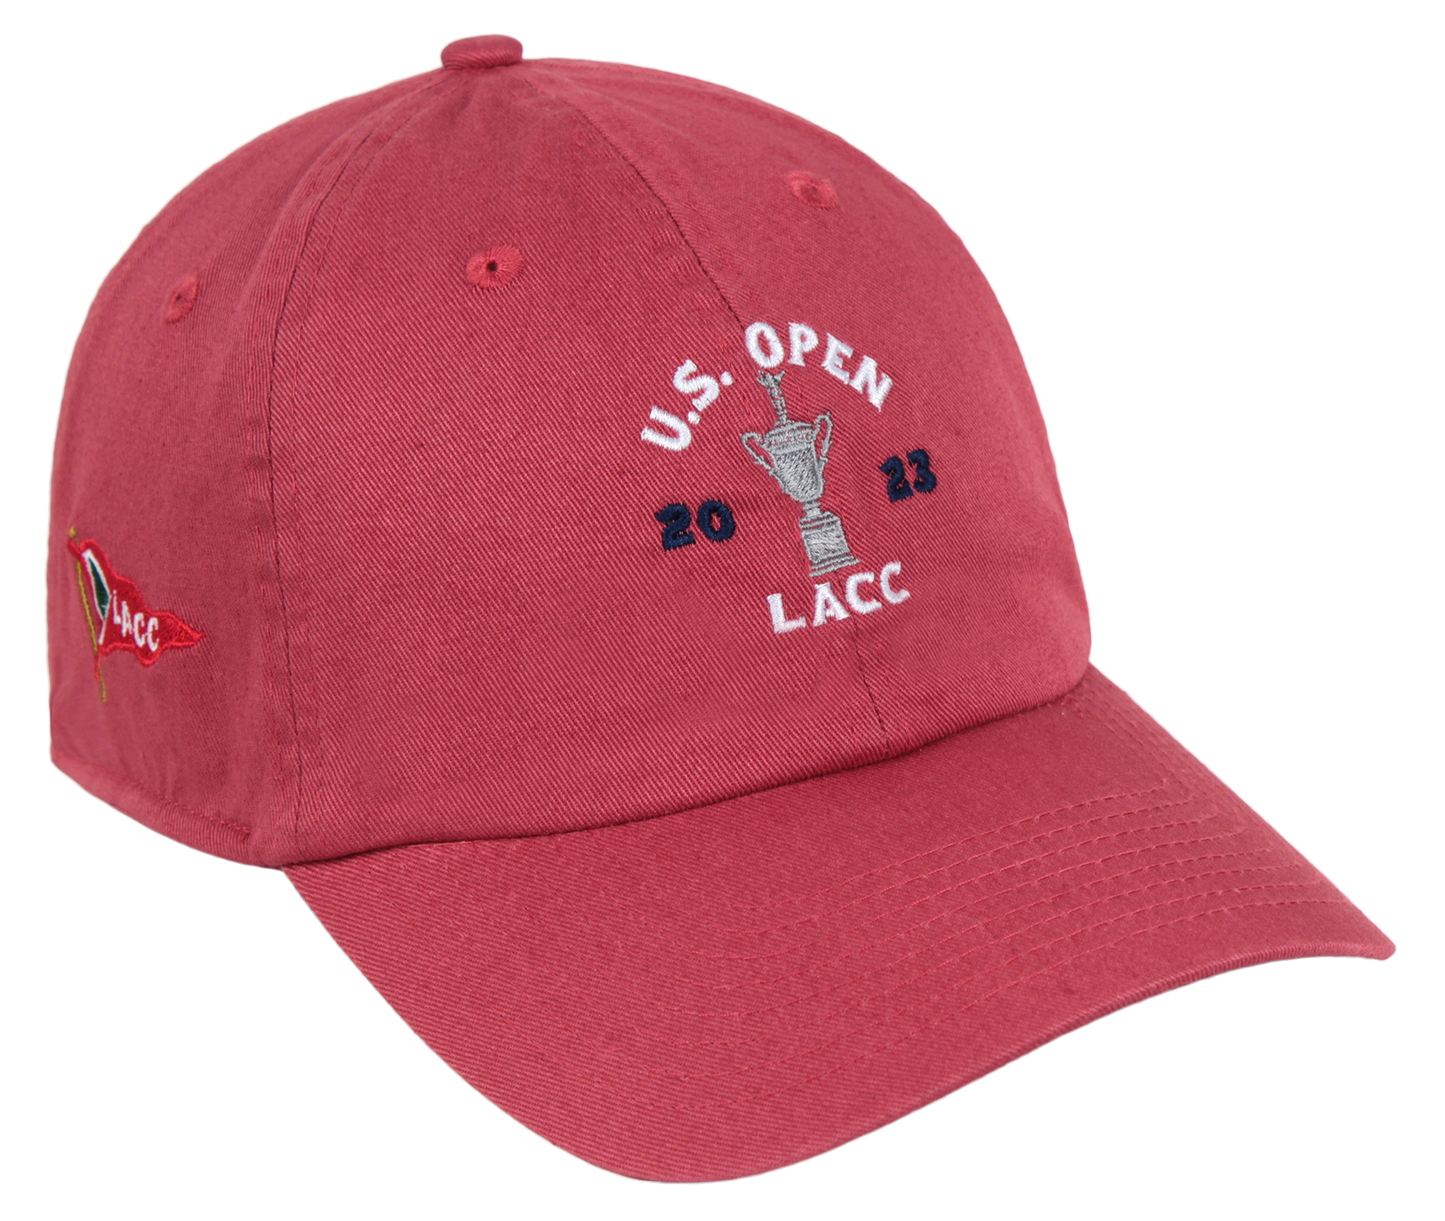 U.S. Open Red Washed Cotton Twill Relaxed Fit Cap